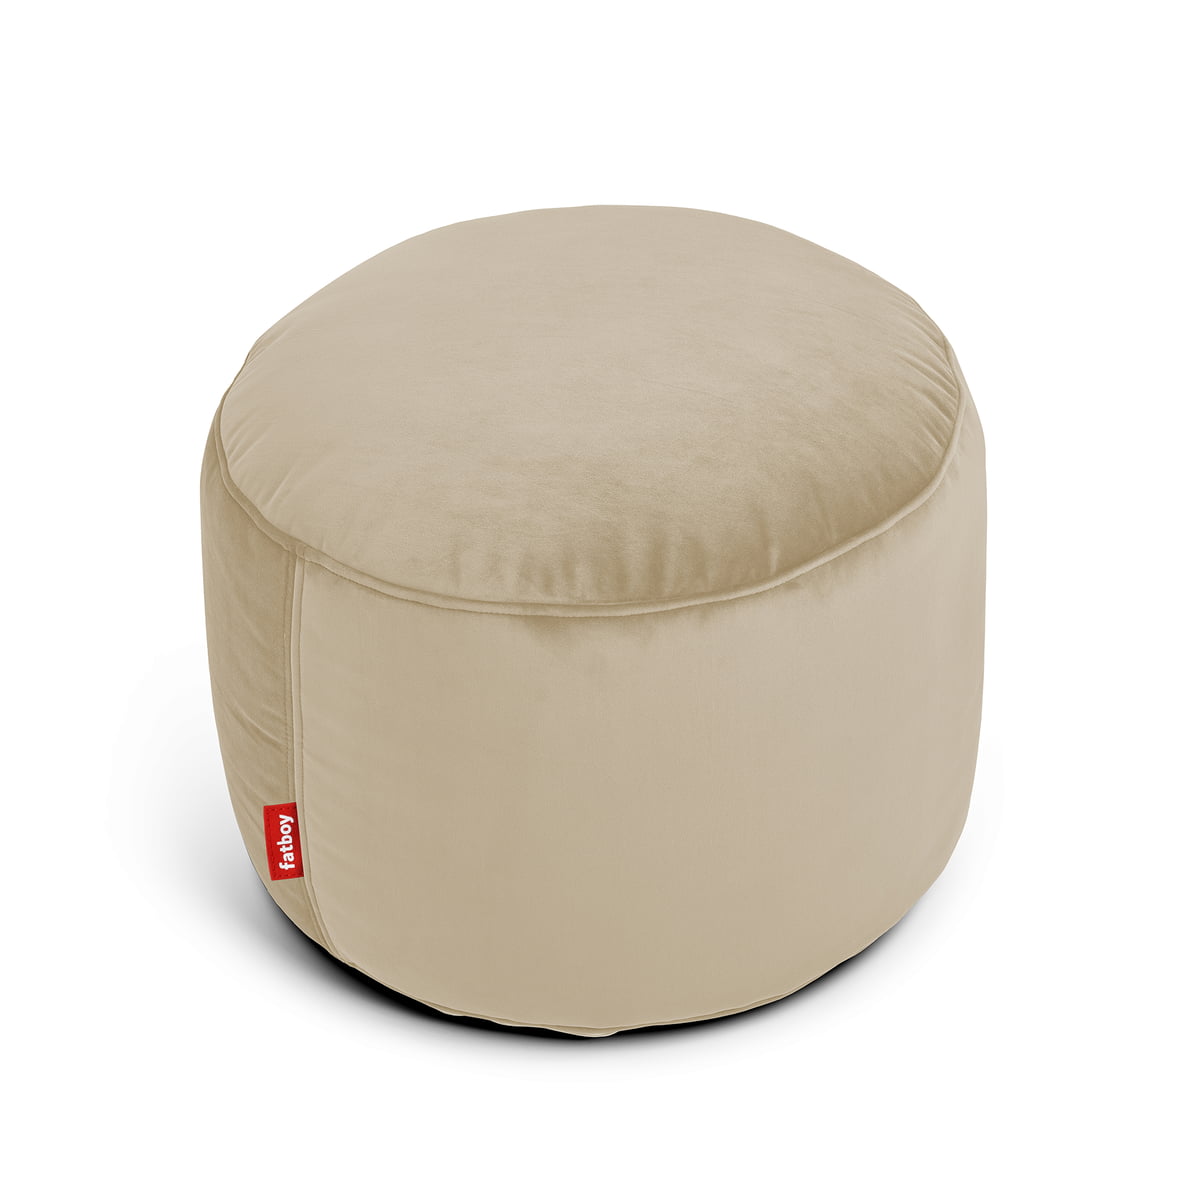 Pouf POINT OUTDOOR de Fatboy, Red